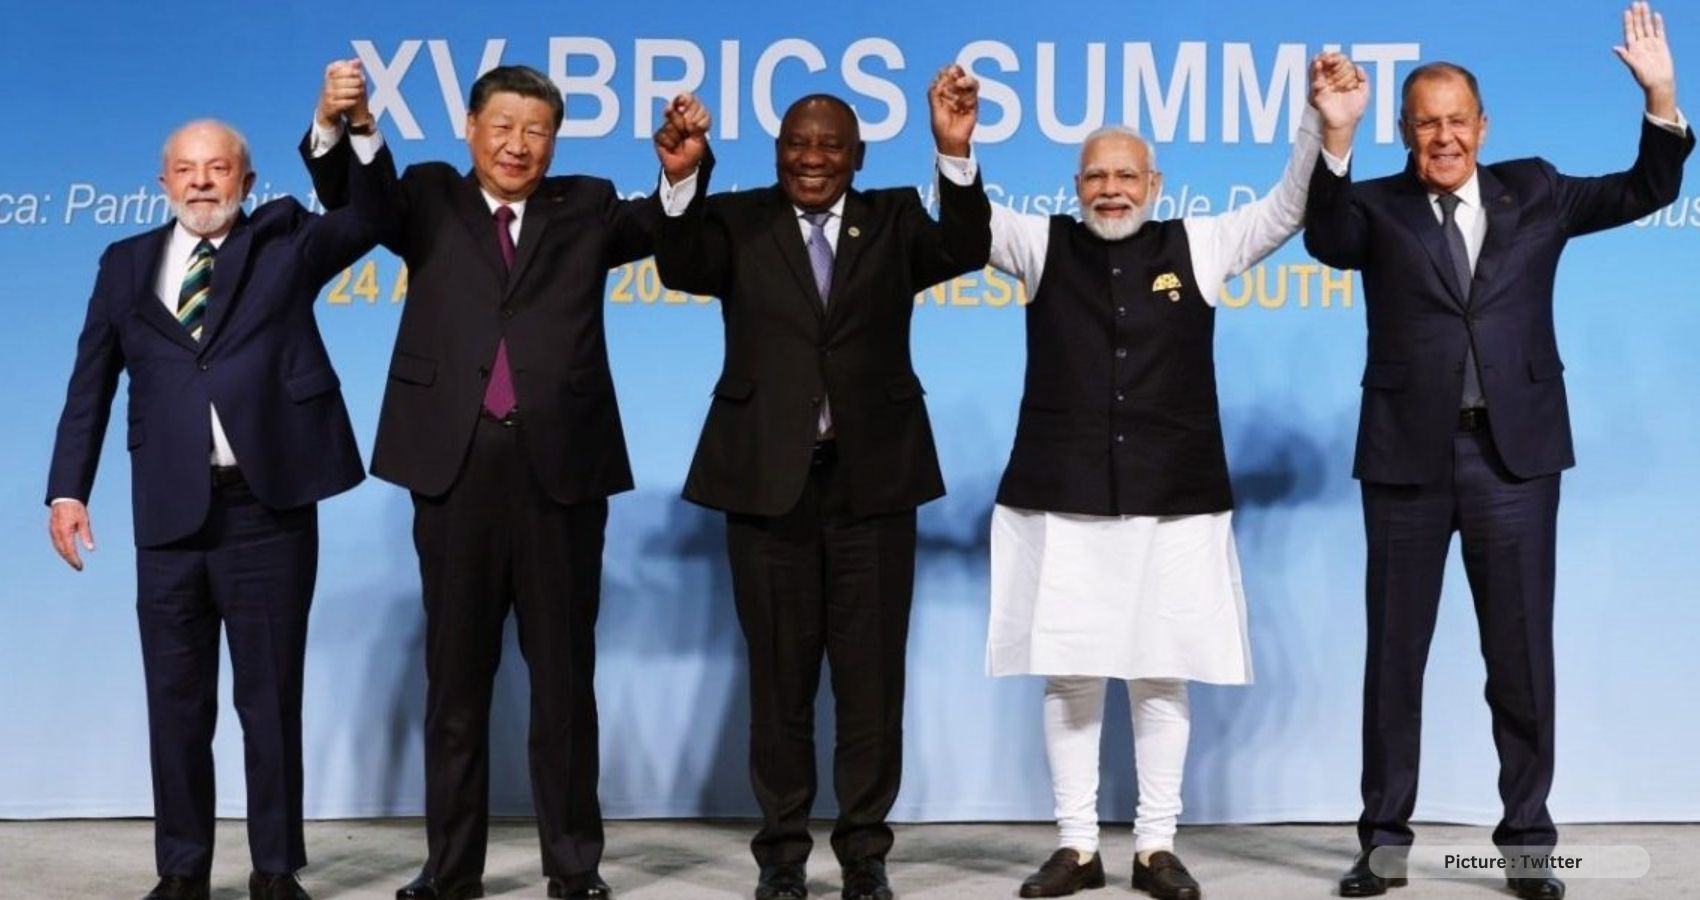 India Plummets in Global Talent Competitiveness Index, Ranking 103rd – Lowest Among BRICS Nations